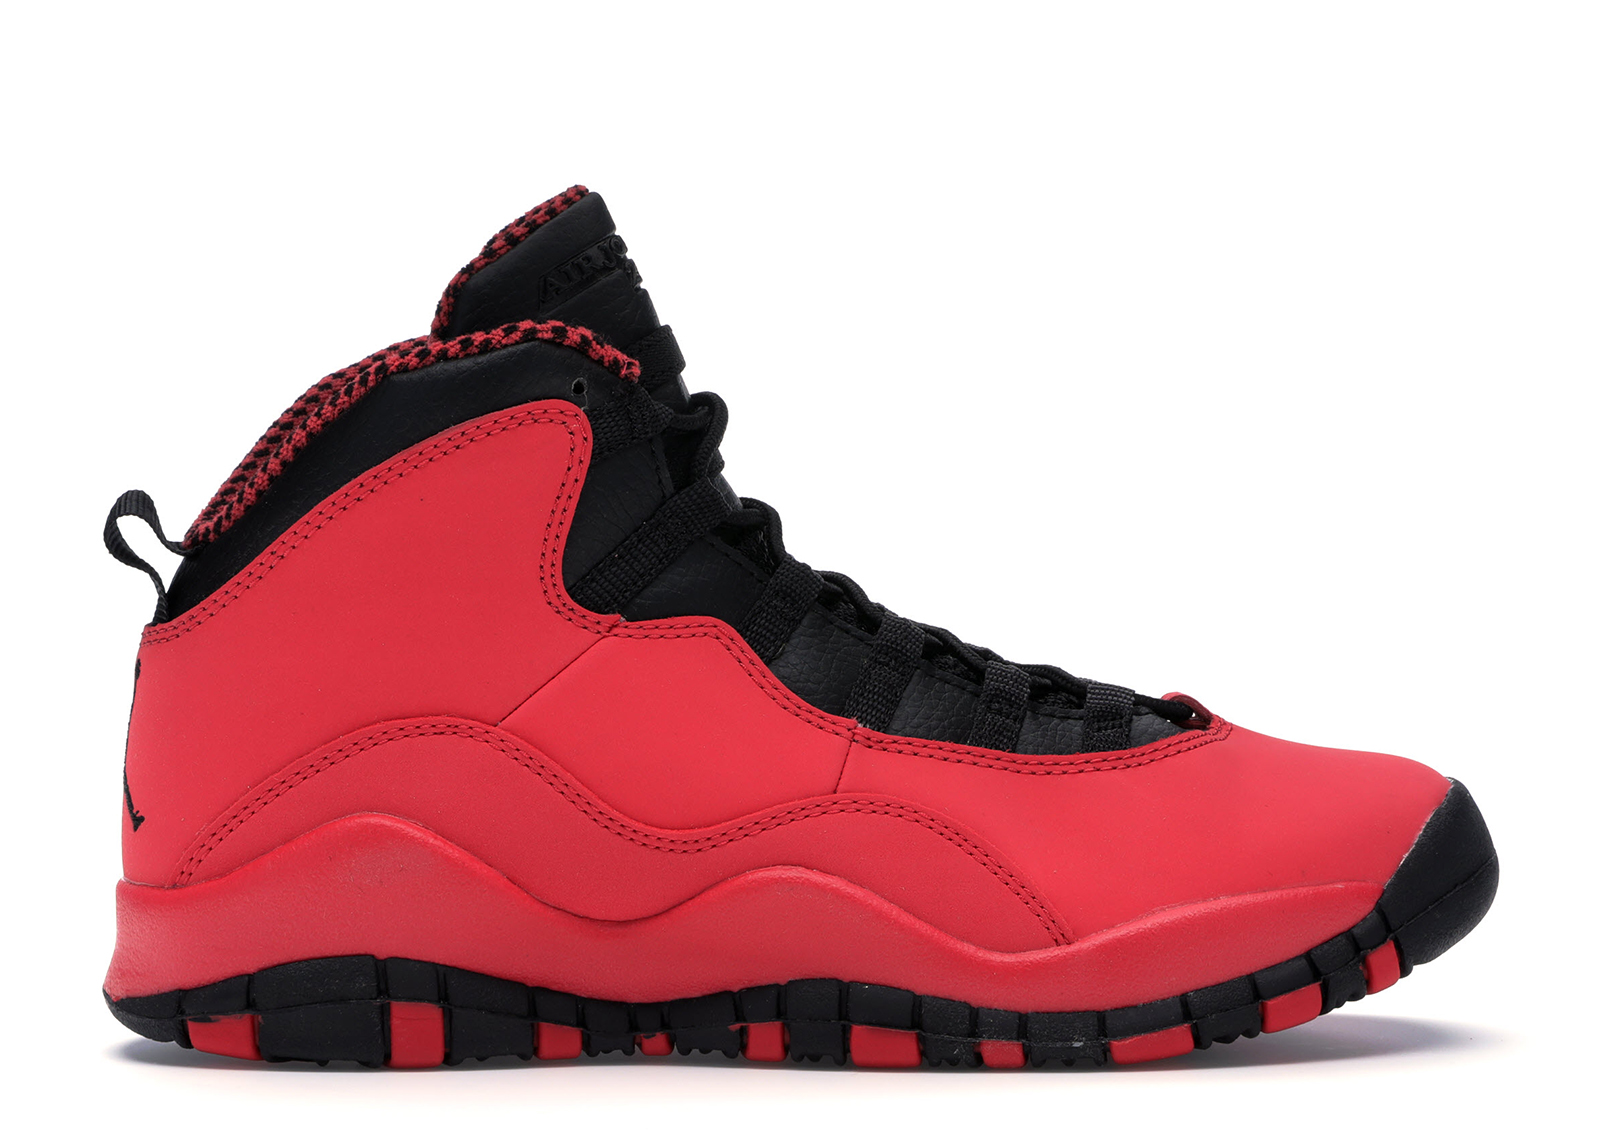 jordan 10s red and white